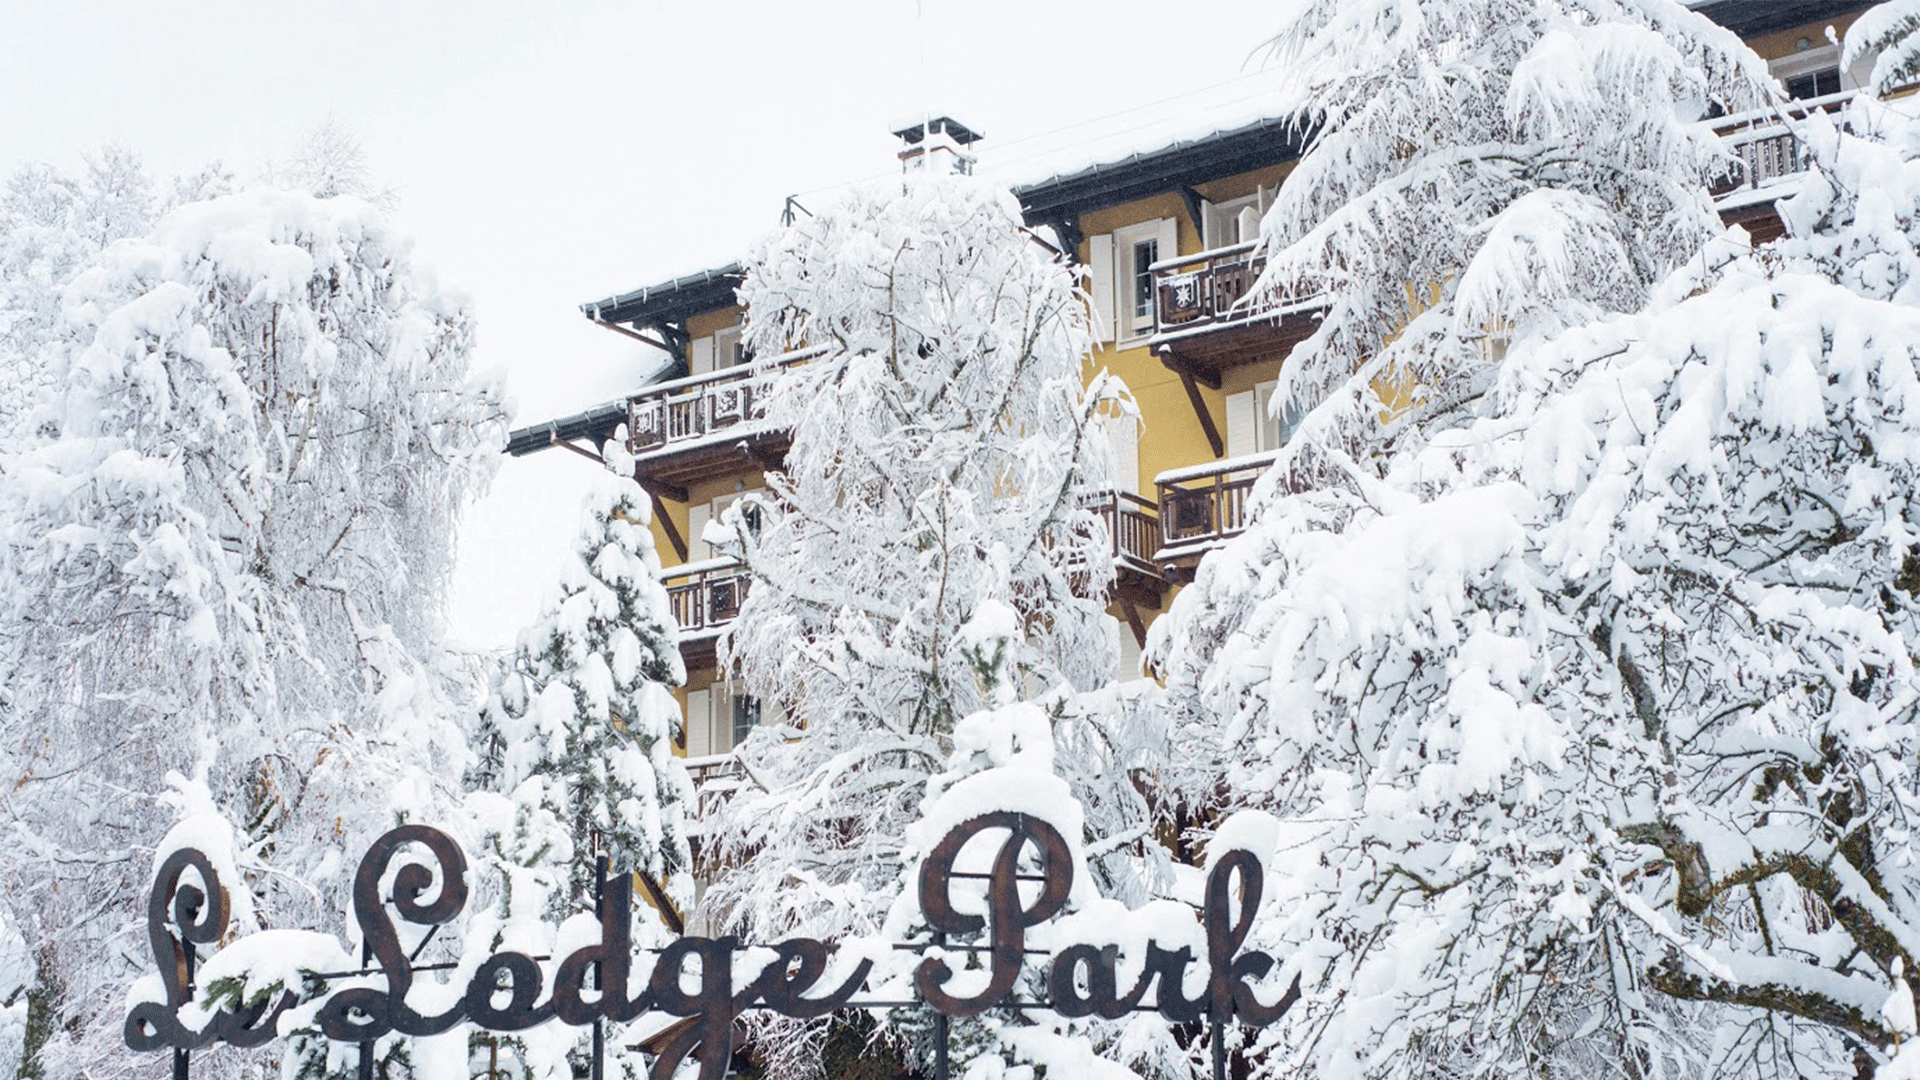 Stay-in-Lodge-Park-Megeve-France